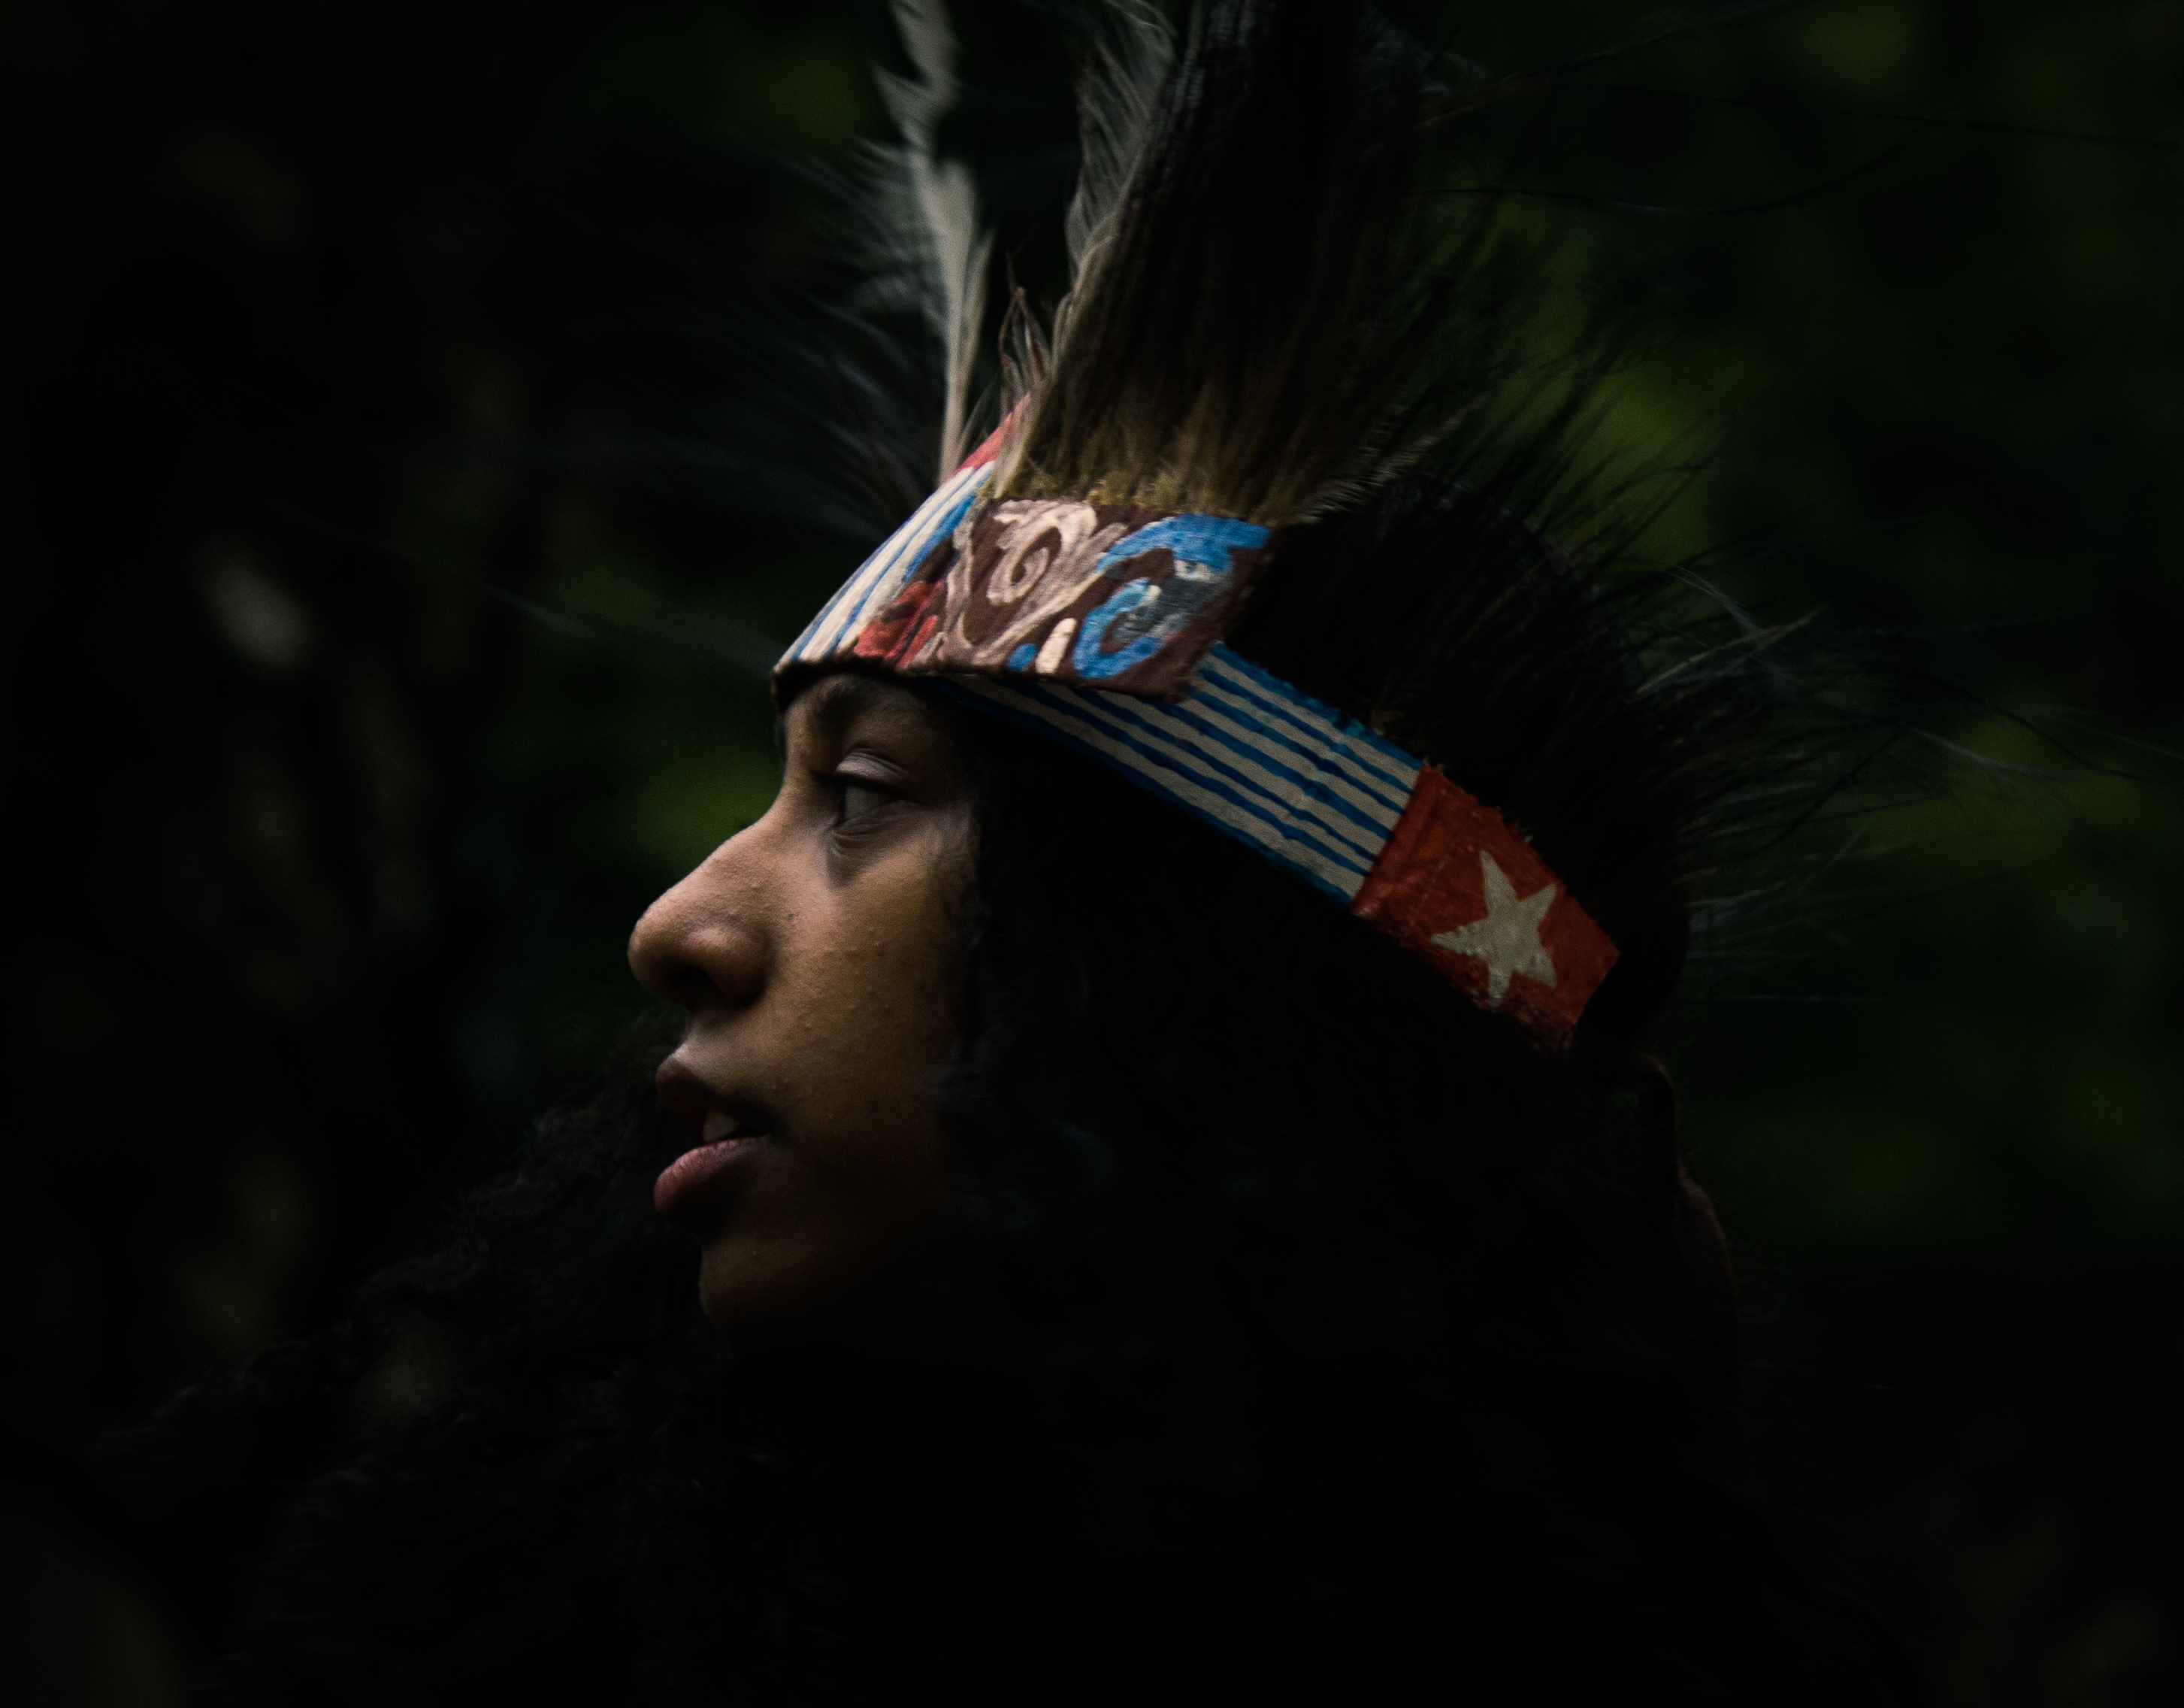 Image of a young West Papuan woman looking out to the distance wearing a West Papuan headdress with feathers and featuring the West Papuan morning star flag.